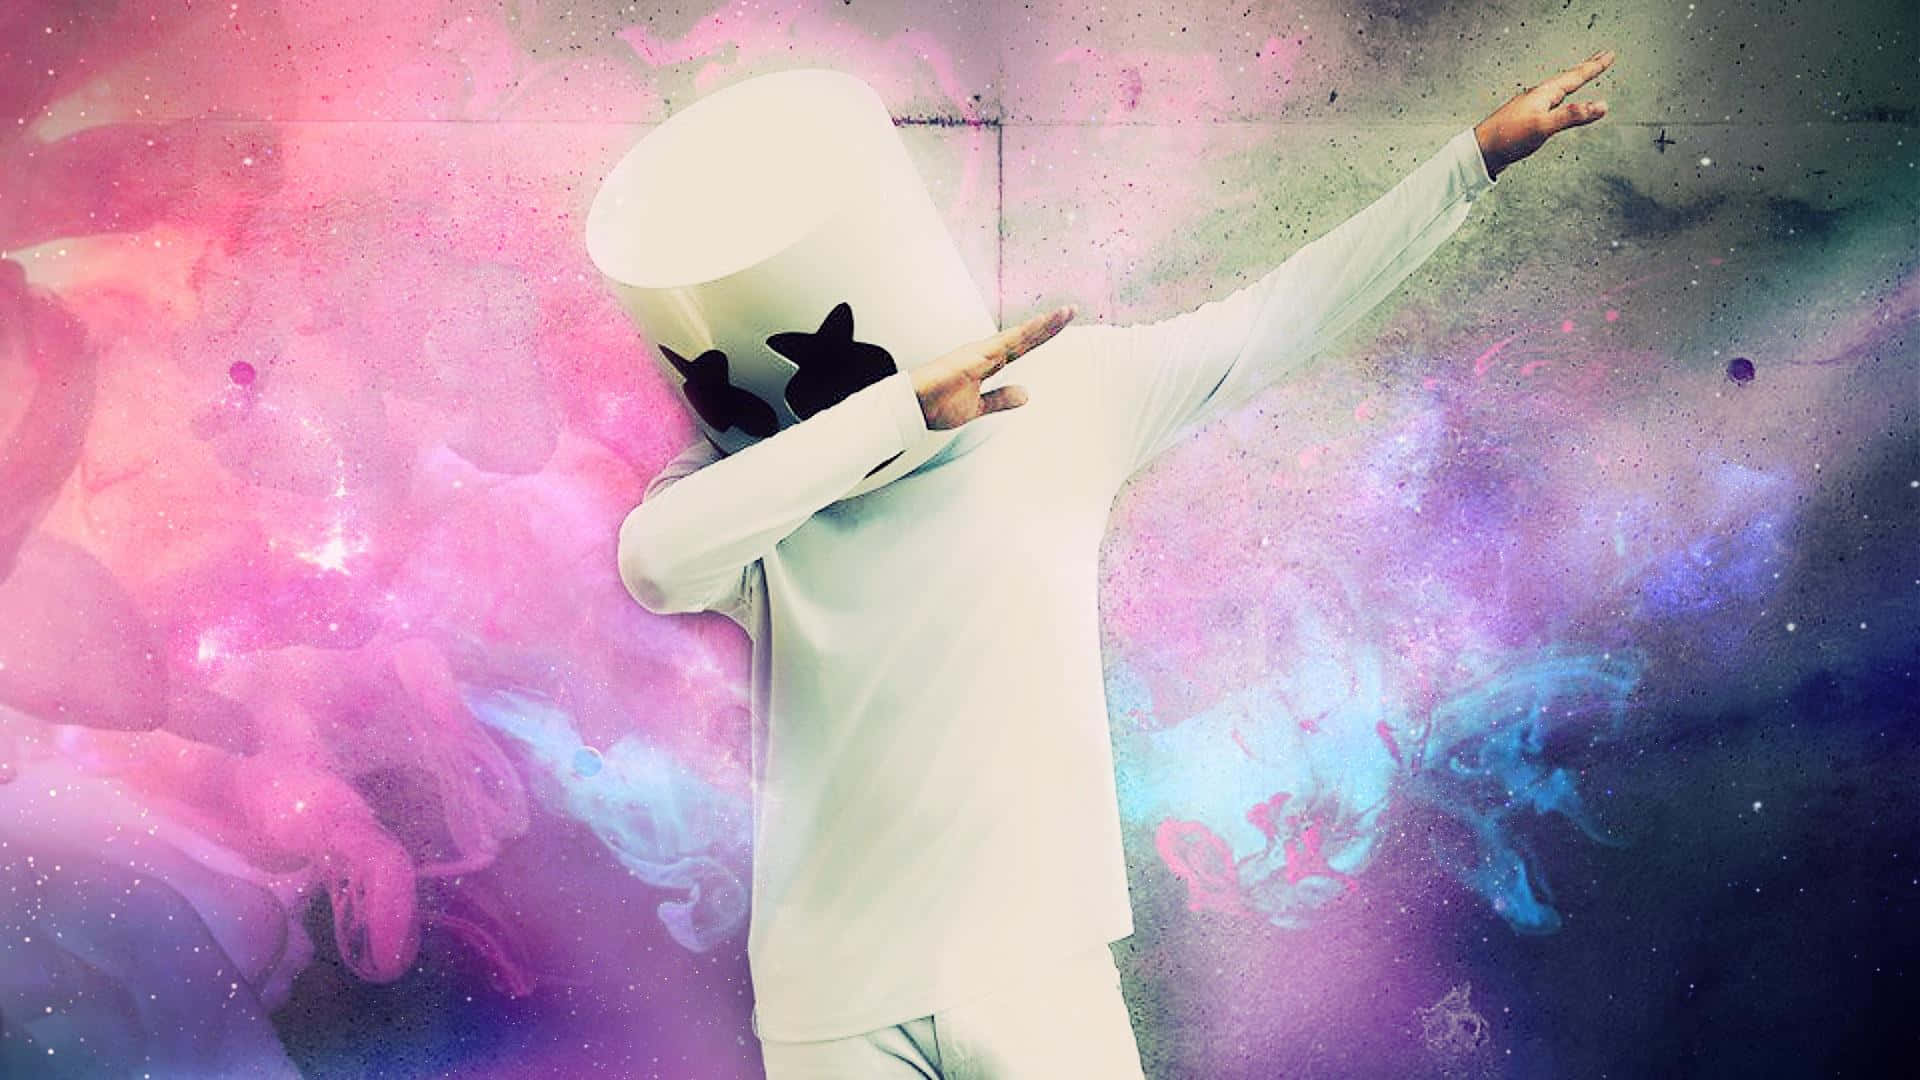 Feel the Beat with Marshmello